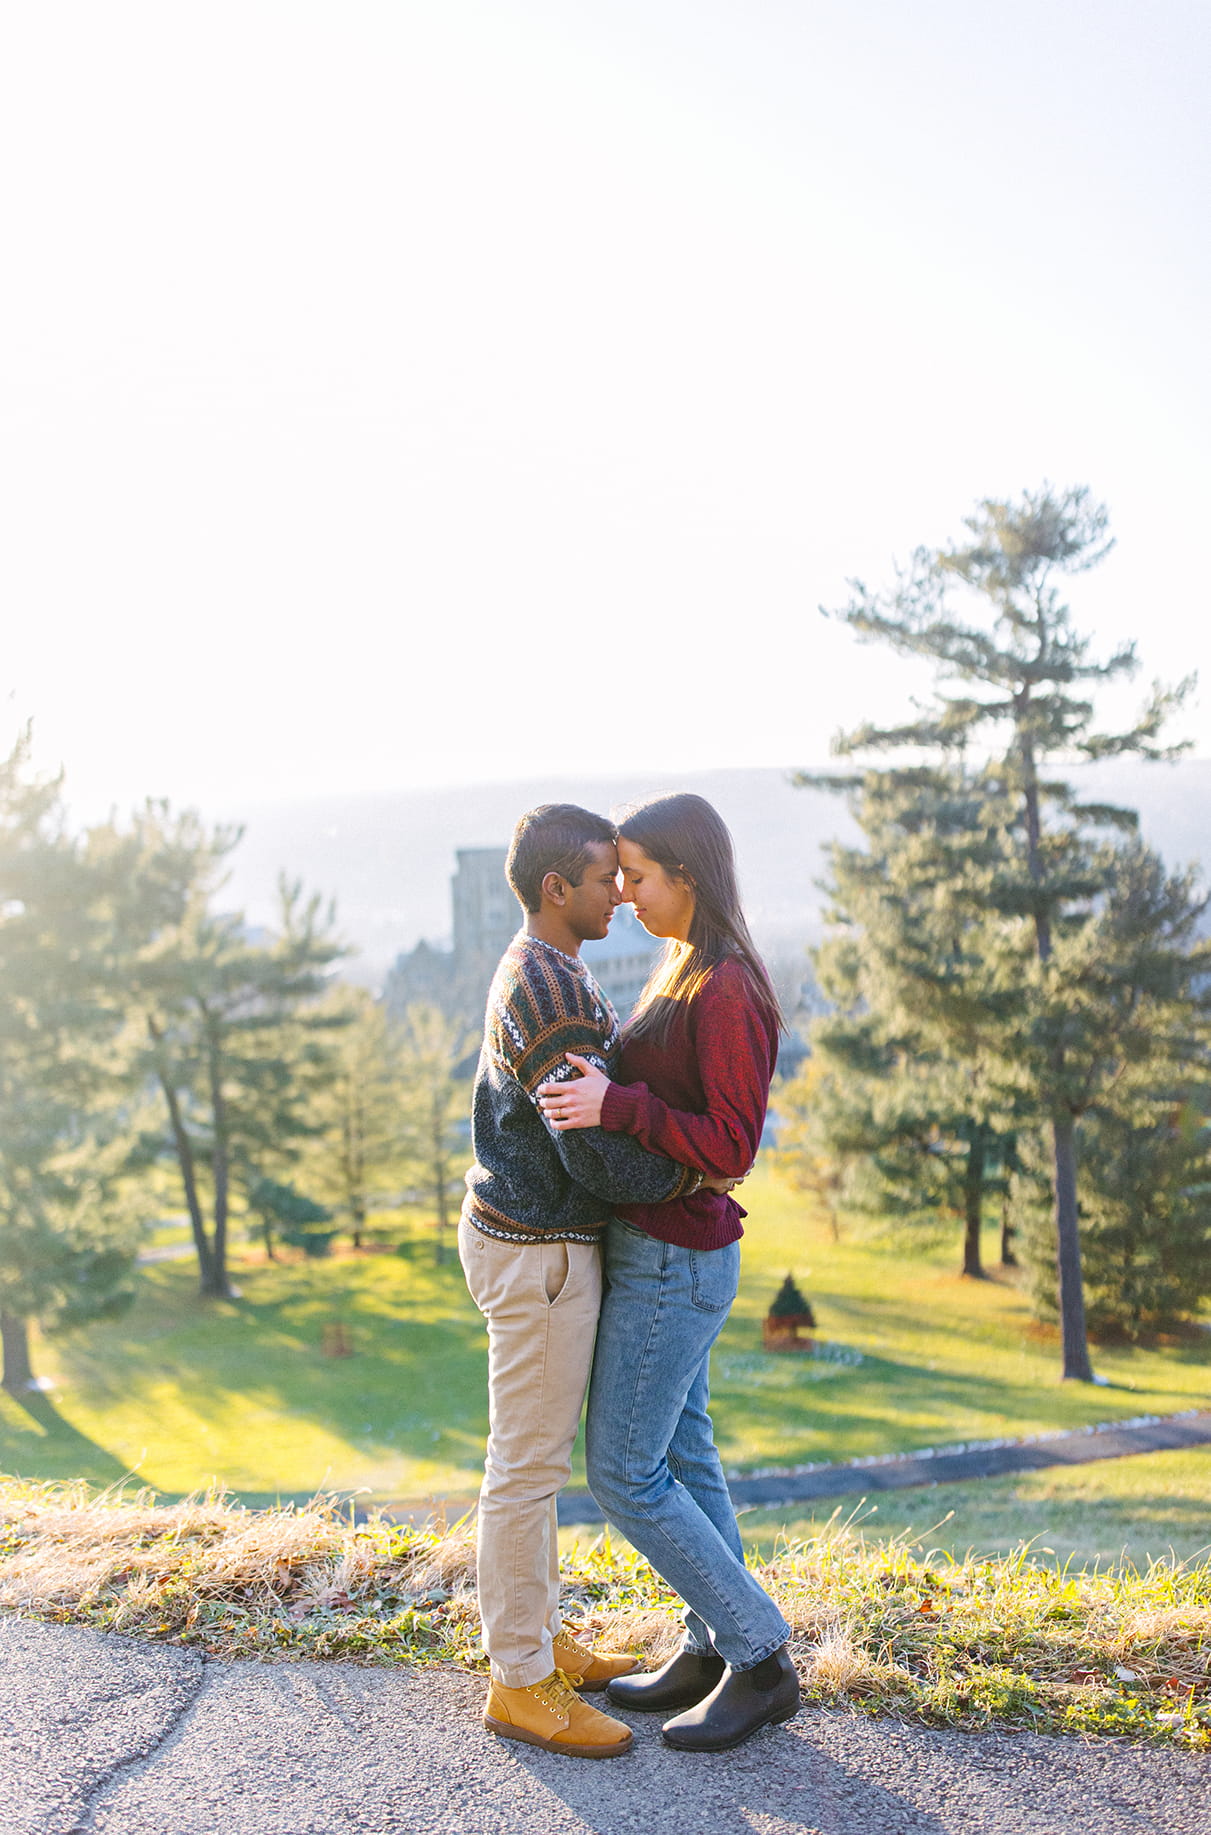 Couple embraces during engagement session on hill overlooking the campus of Cornell University in Ithaca, NY